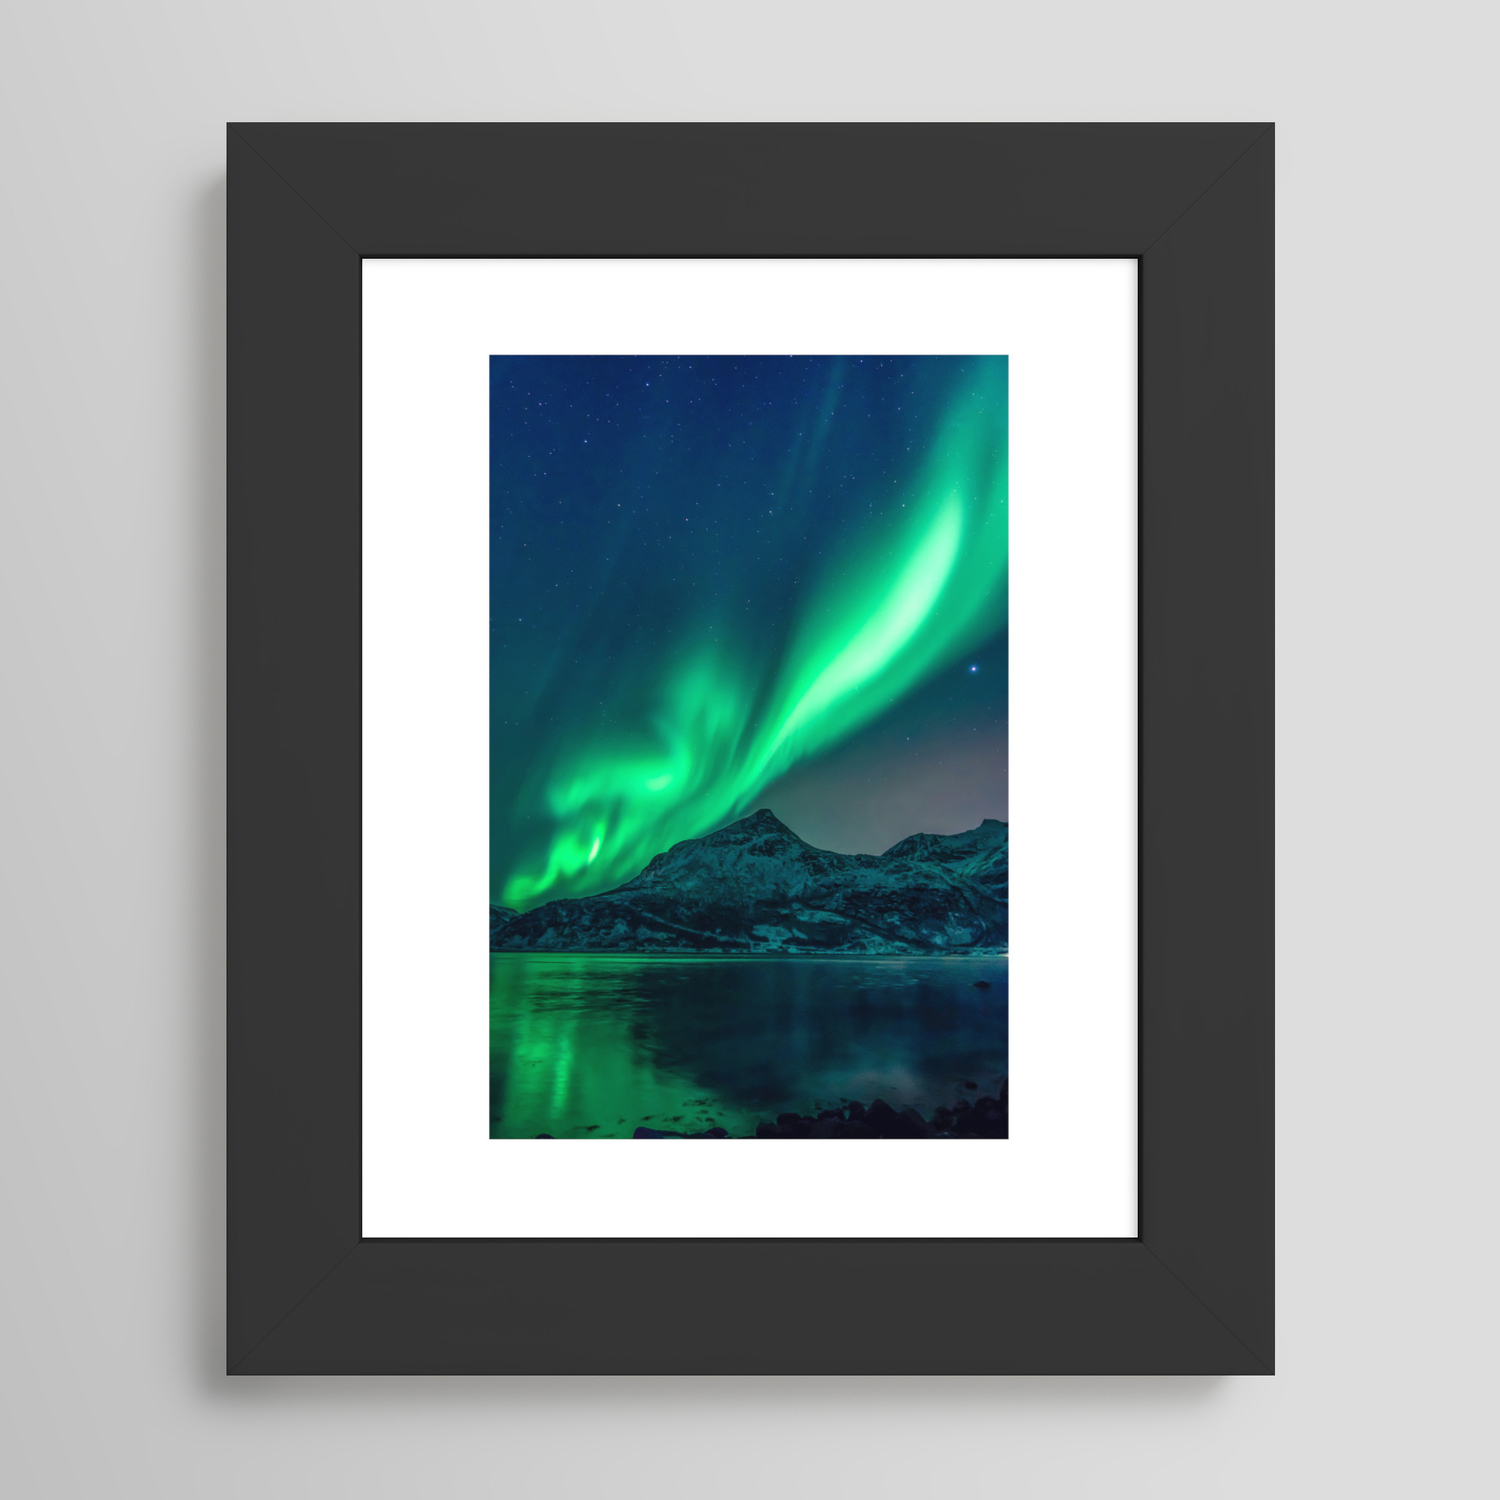 JP London Solvent Free Print SPAP1X55073 Vikivaki Electric Northern Lights Ready to Frame Poster Wall Art 17 h by 11 w 